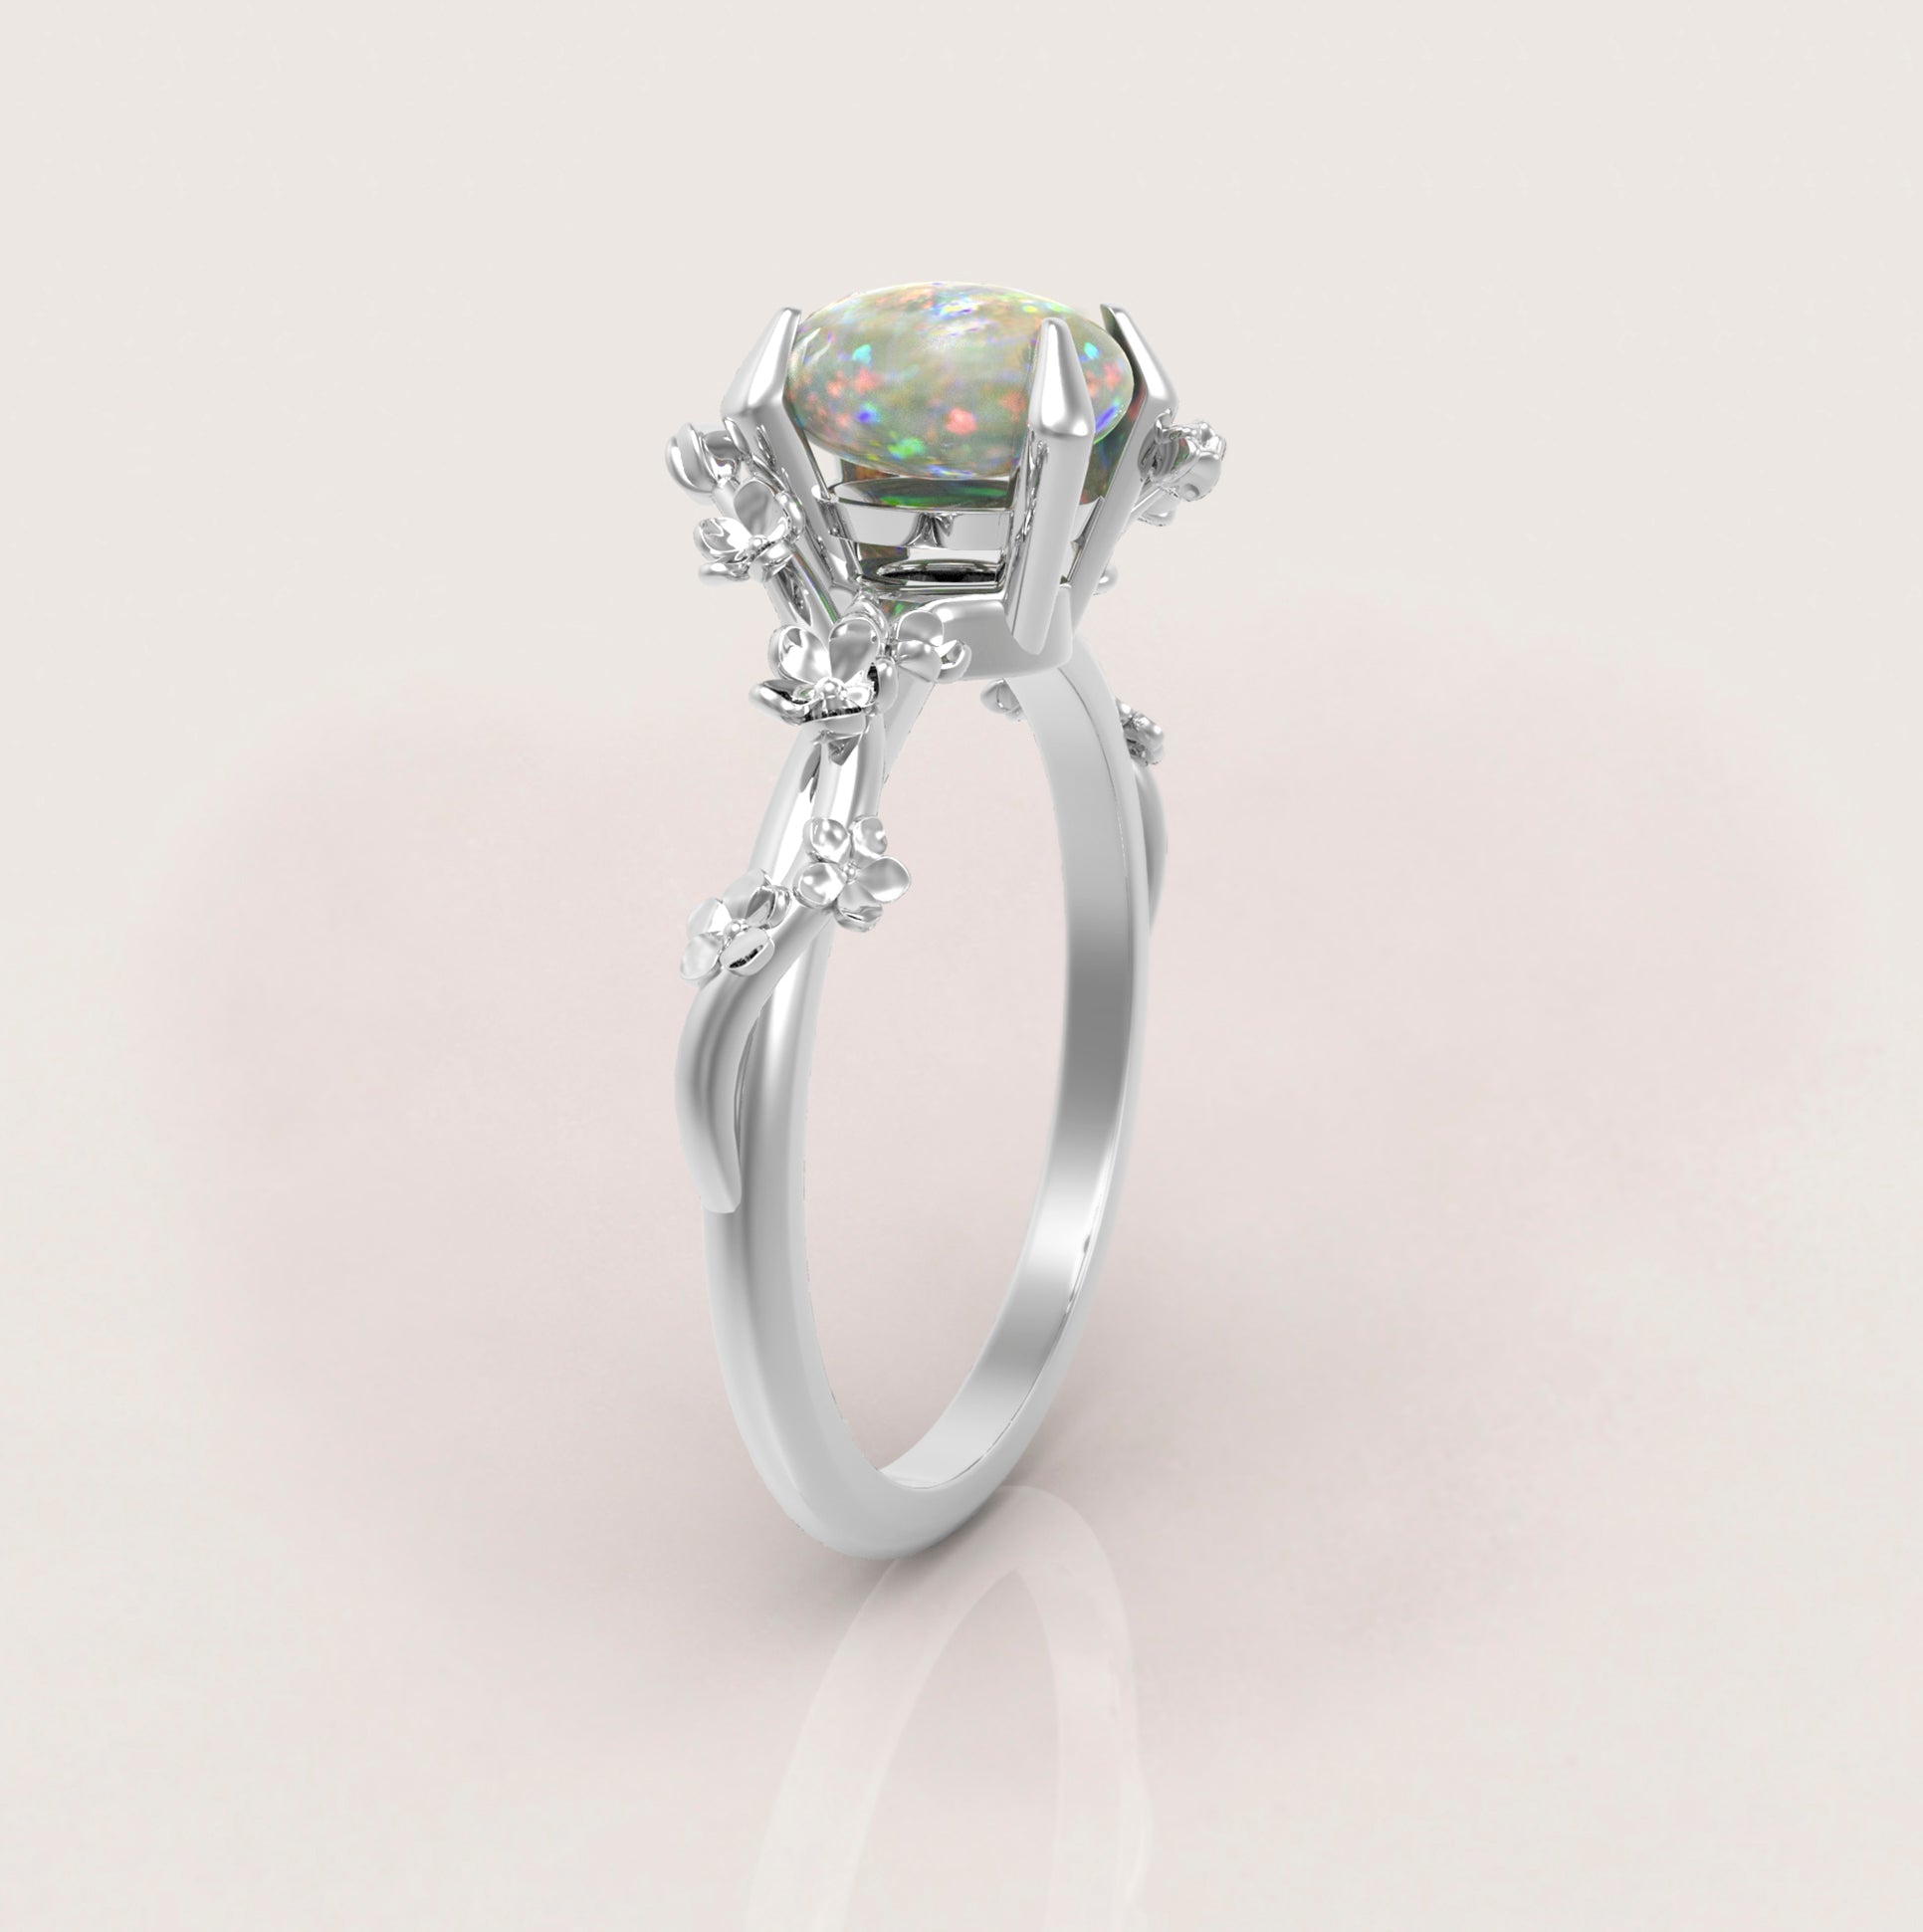 Unique Flowers Engagement Ring No.6 in White Gold - Opal - Roelavi